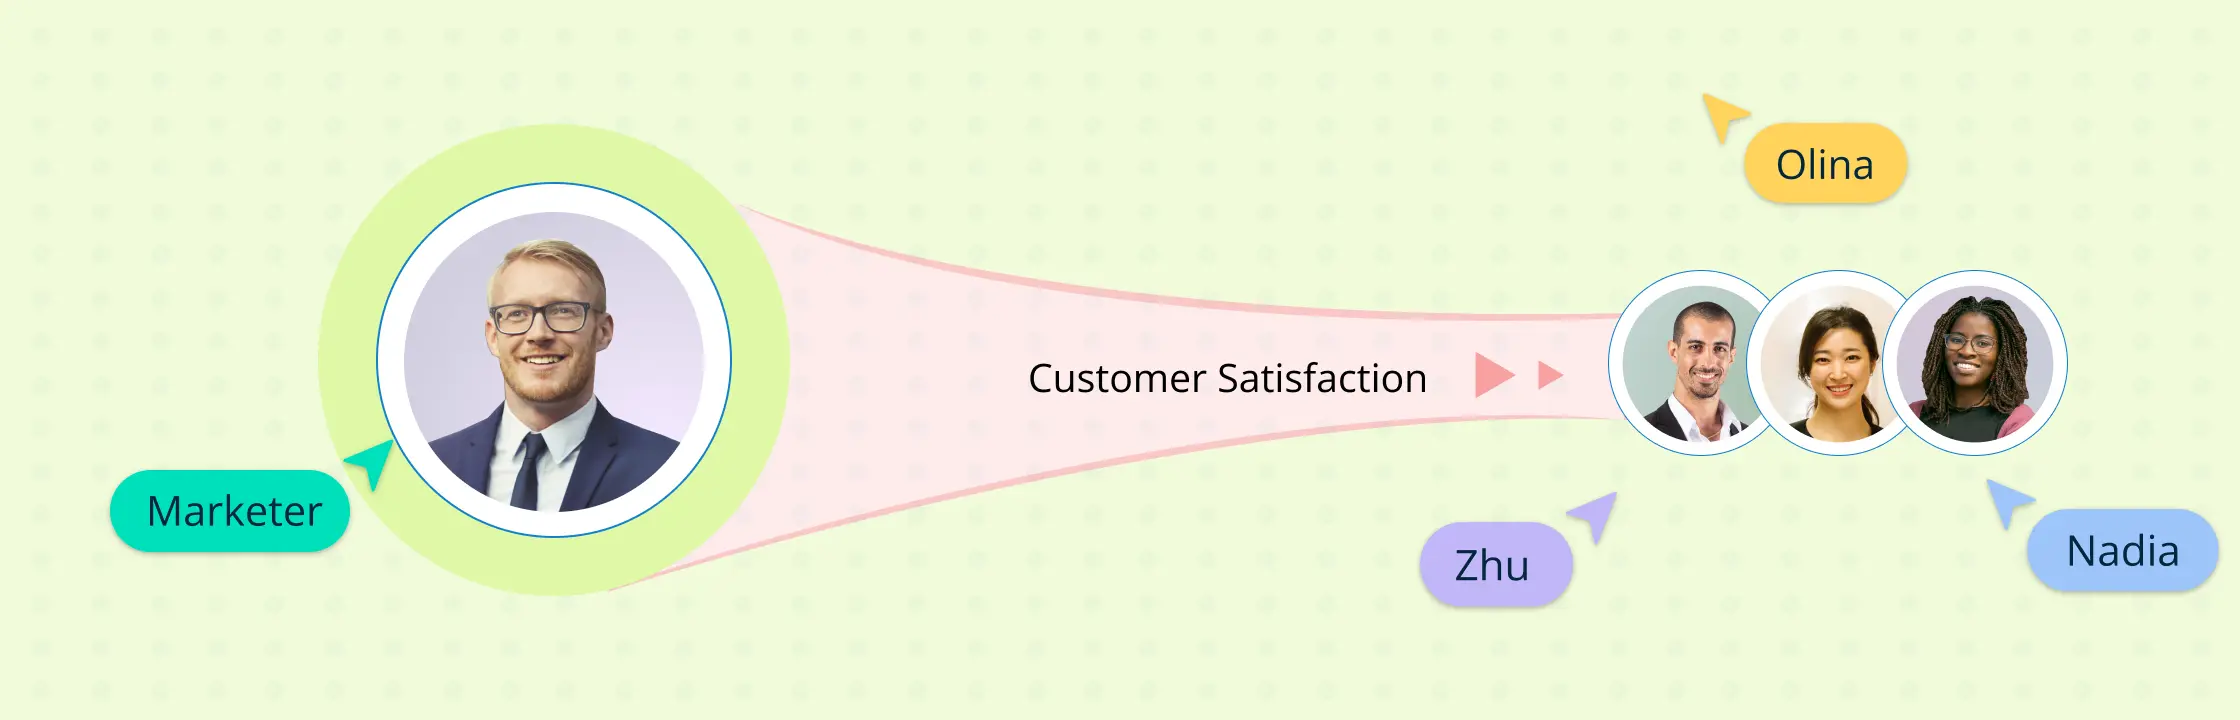 How to Set up a Customer Experience Management Framework